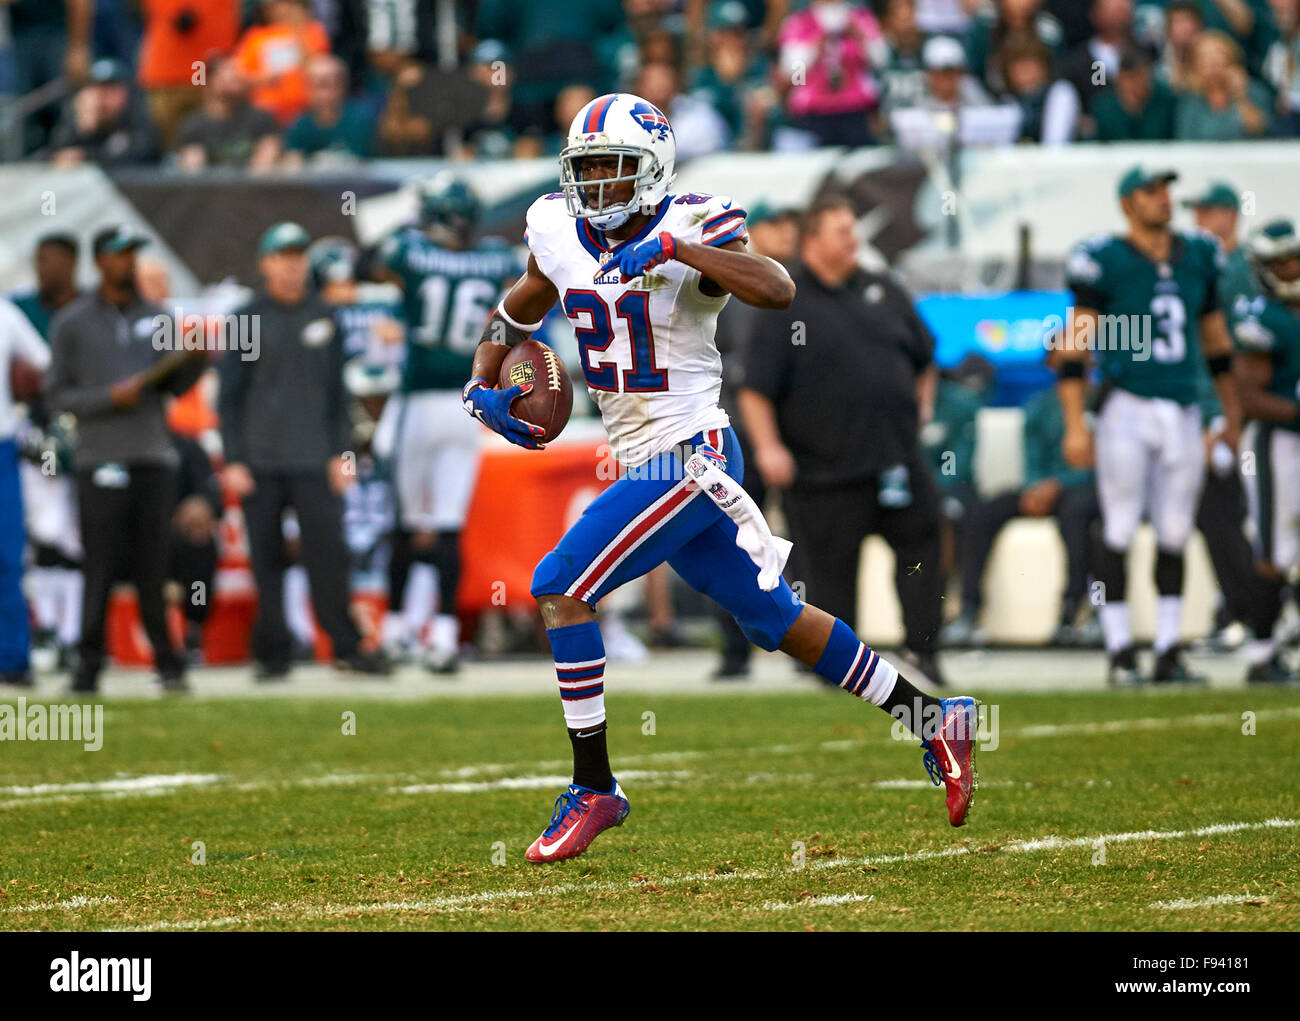 Philadelphia, Pennsylvania, USA. 13th Dec, 2015. Bills' cornerback Leodis McKelvin (21) reacts after making an interception in the second half during NFL action between the Buffalo Bills and the Philadelphia Eagles at Lincoln Financial Field in Philadelphia, Pennsylvania. The Eagles defeated the Bills 23-20. Duncan Williams/CSM/Alamy Live News Stock Photo